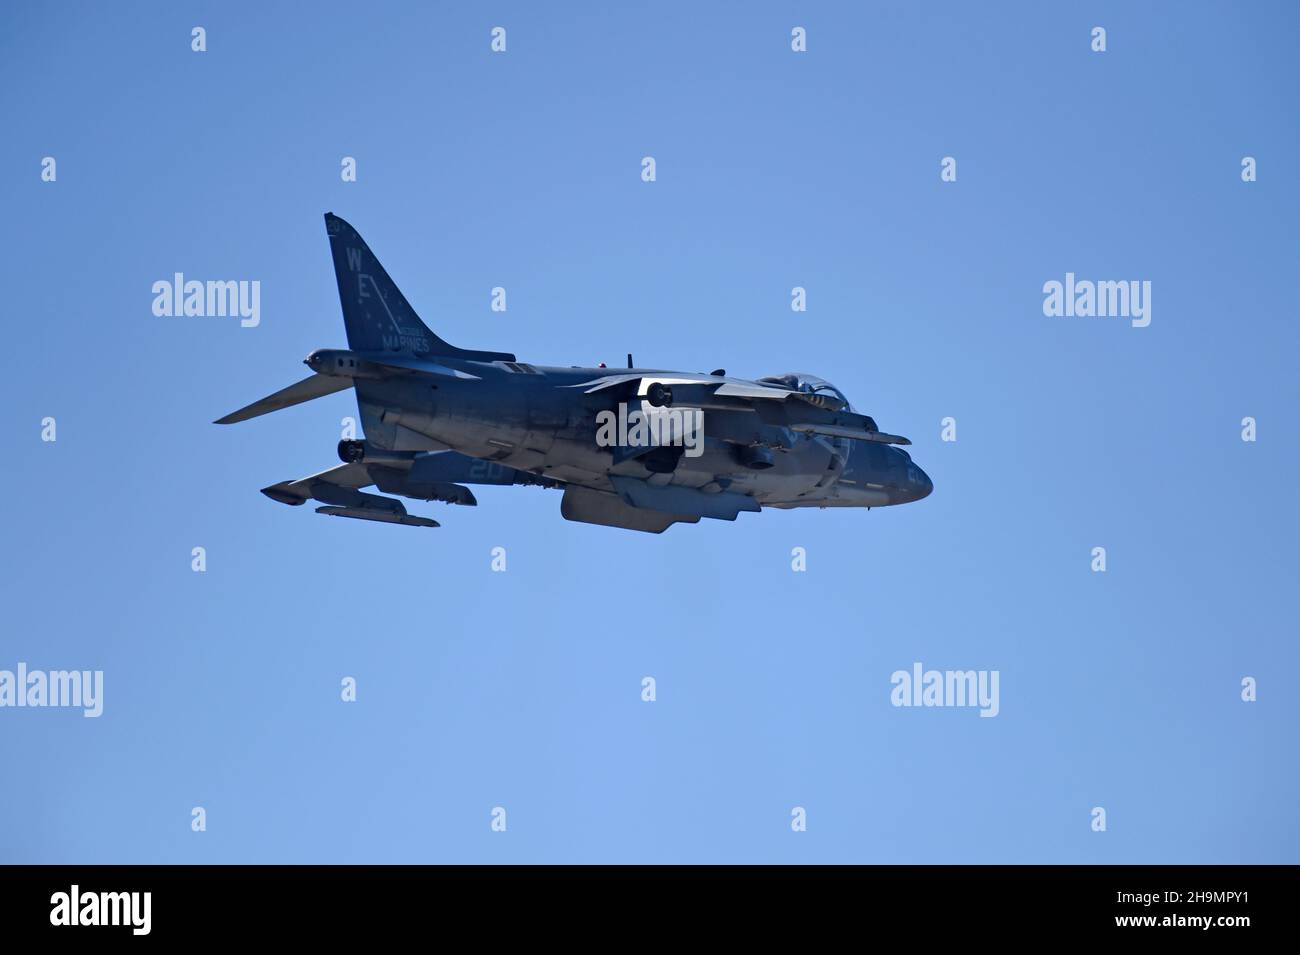 United States Marine Corps AV-8B Harrier hovers and rotates after takeoff at MCAS Miramar, in San Diego, California Stock Photo